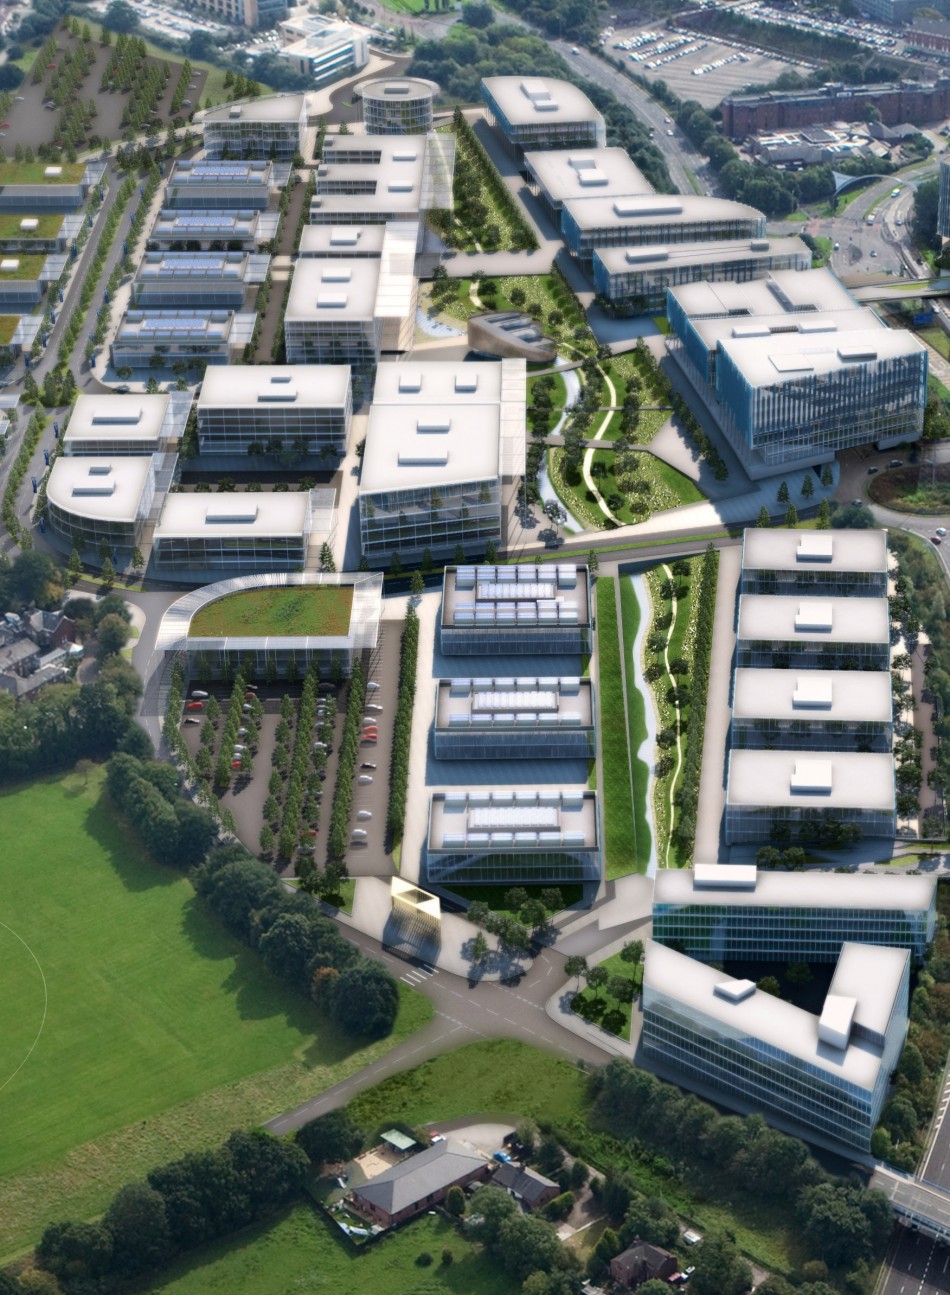 The vision for Airport City has been created by Manchester Airports Group